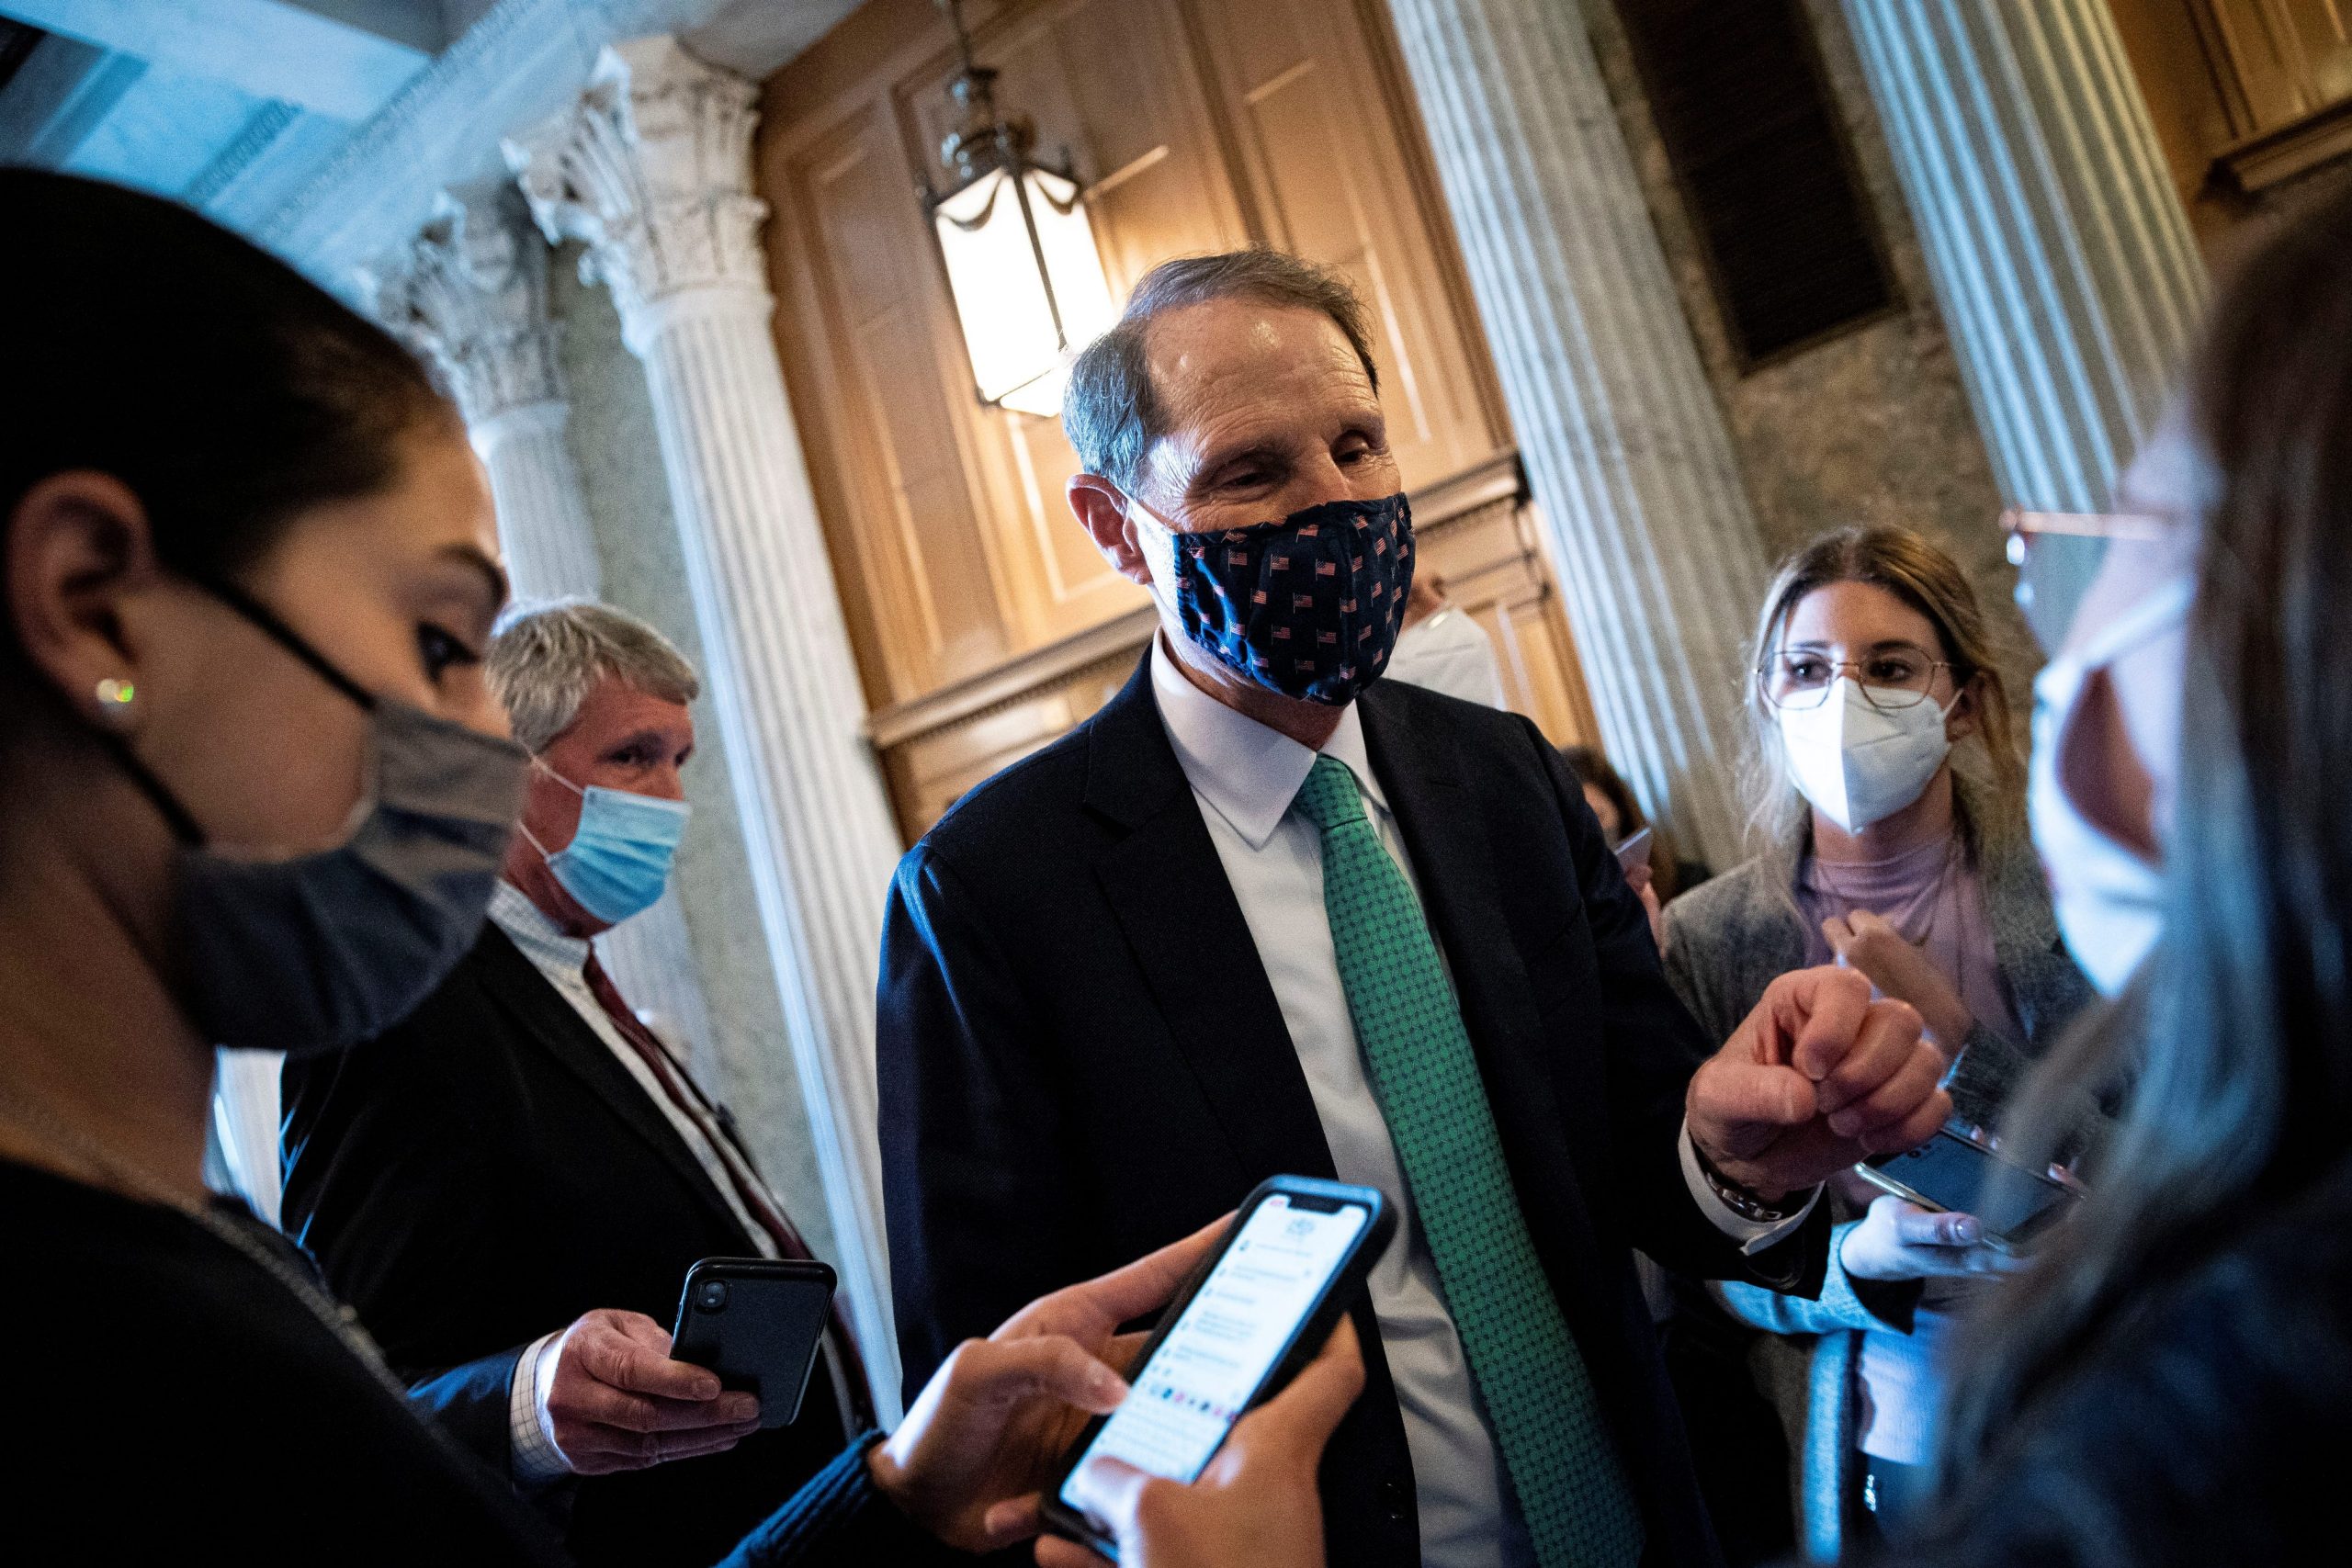 Senator Ron Wyden wears a mask and speaks to reporters in the US Capitol